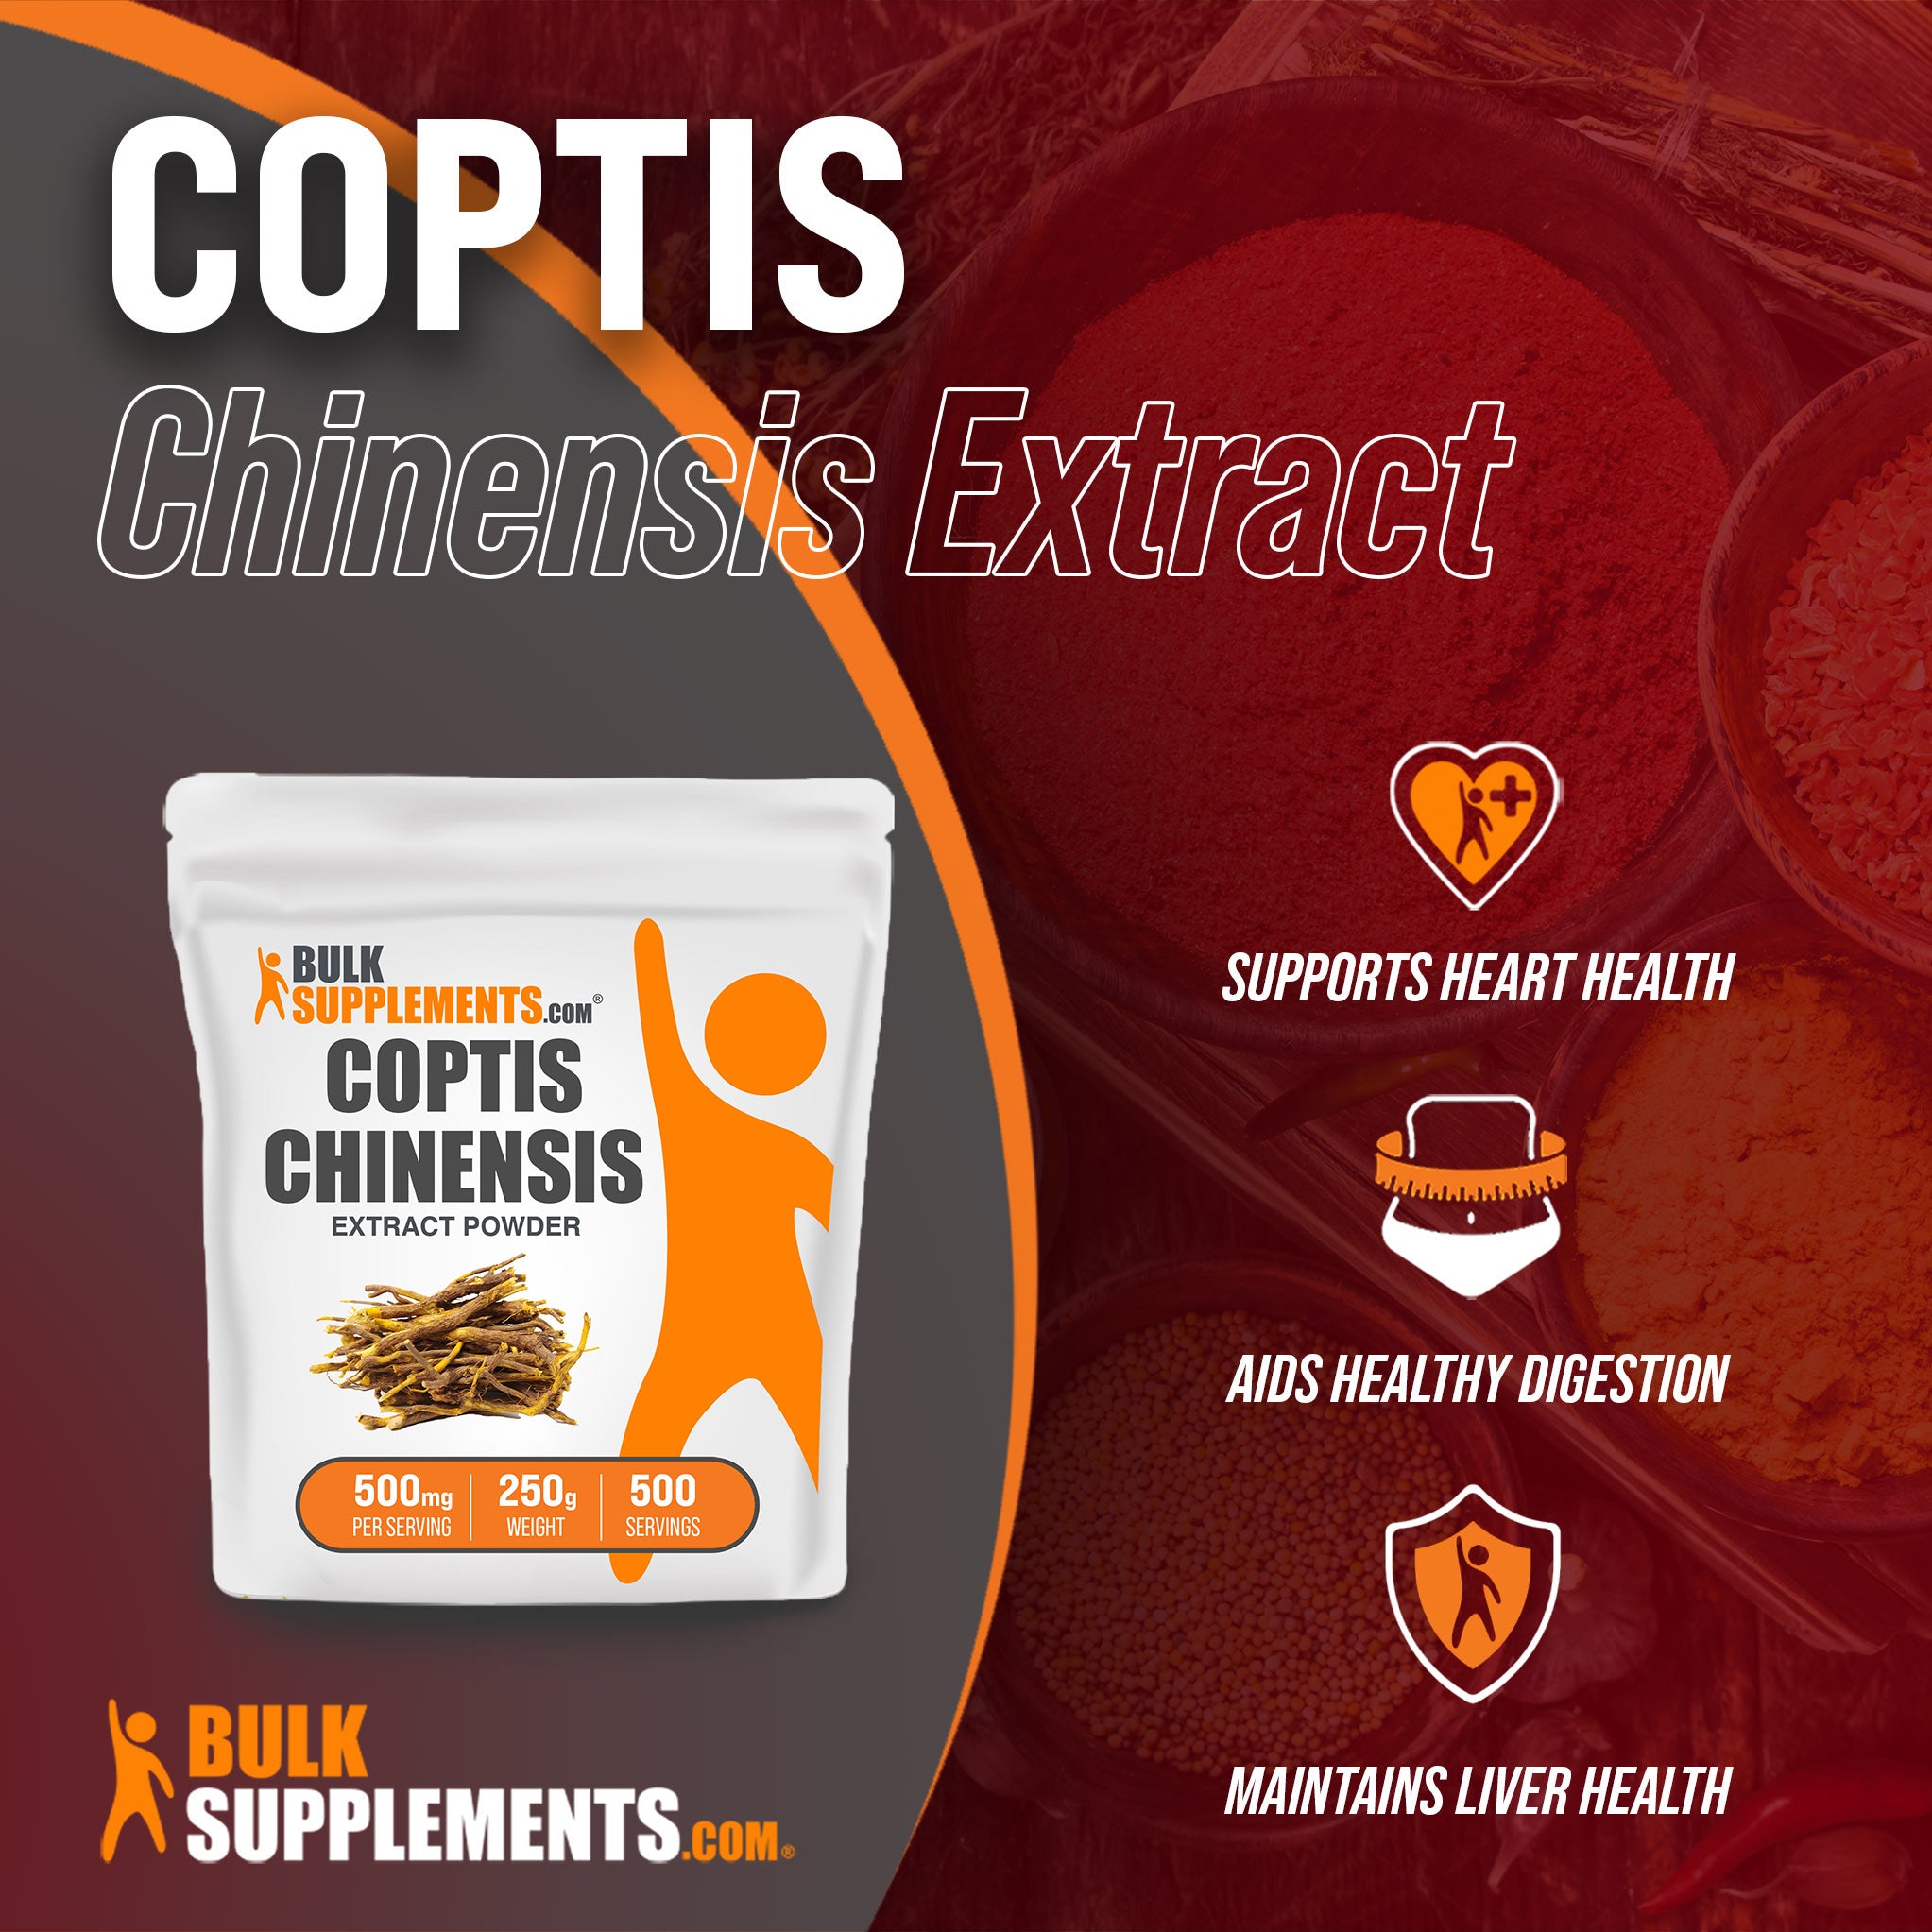 Benefits of 250g Coptis Chinensis; supports heart health, aids healthy digestion, maintains liver health